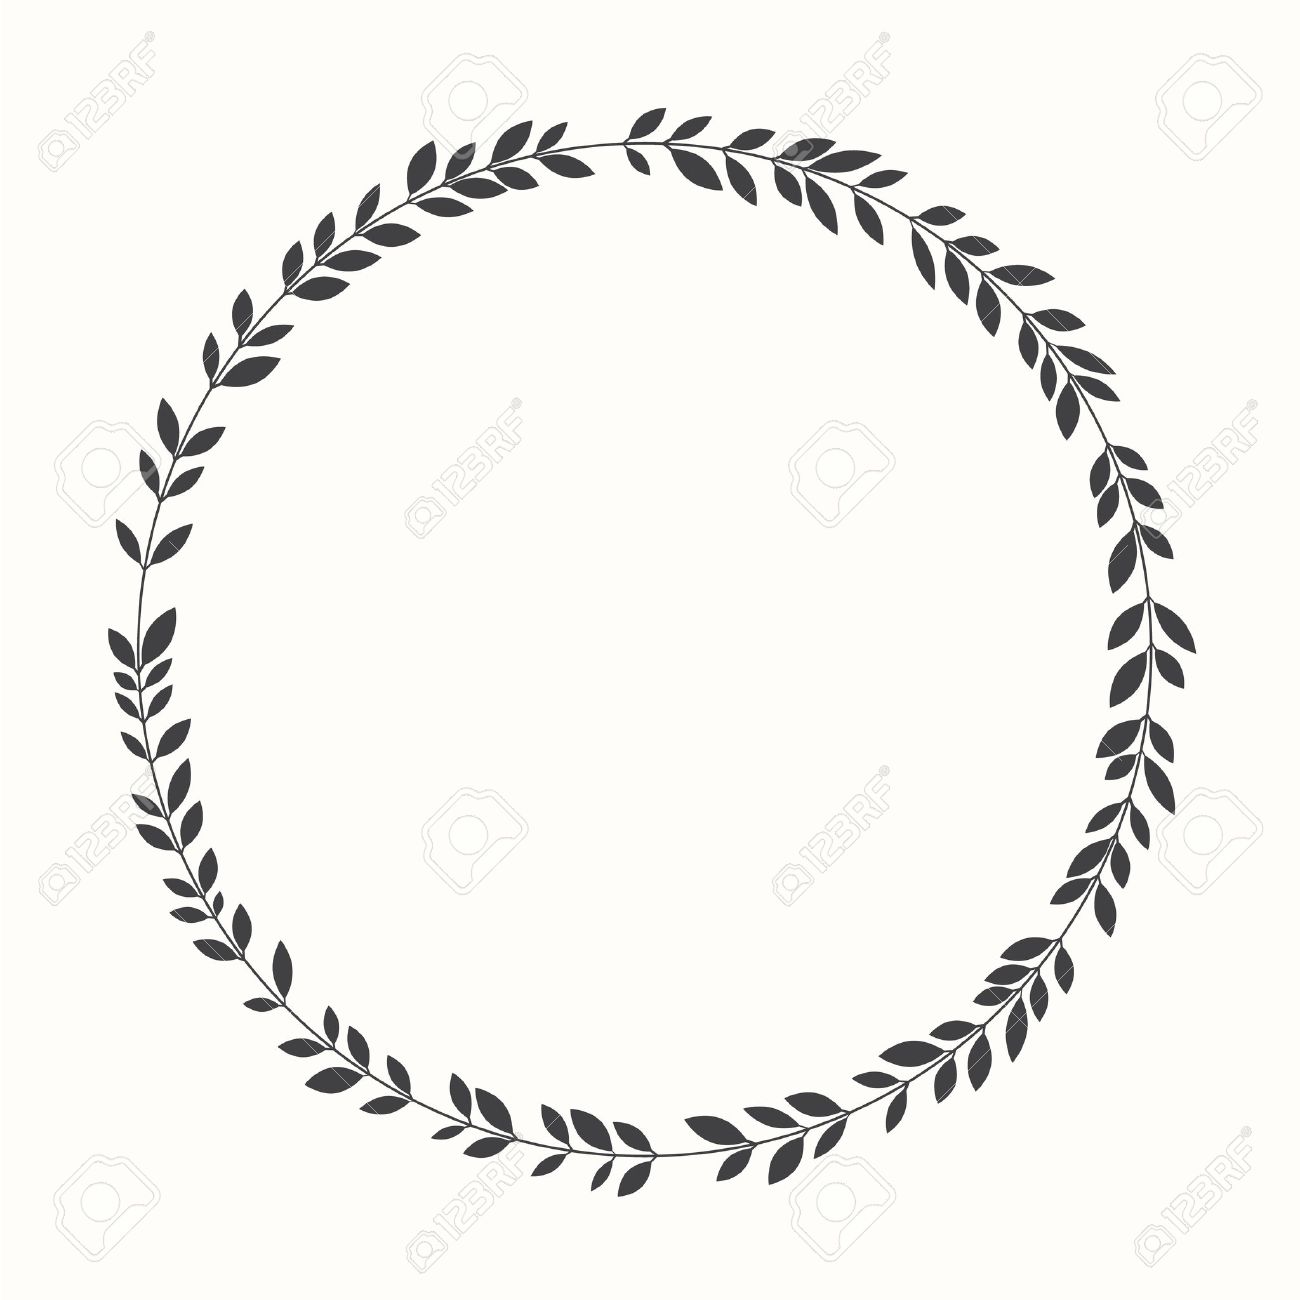 Download Free png Vector Laurel Wreath, Silhouette Royalty